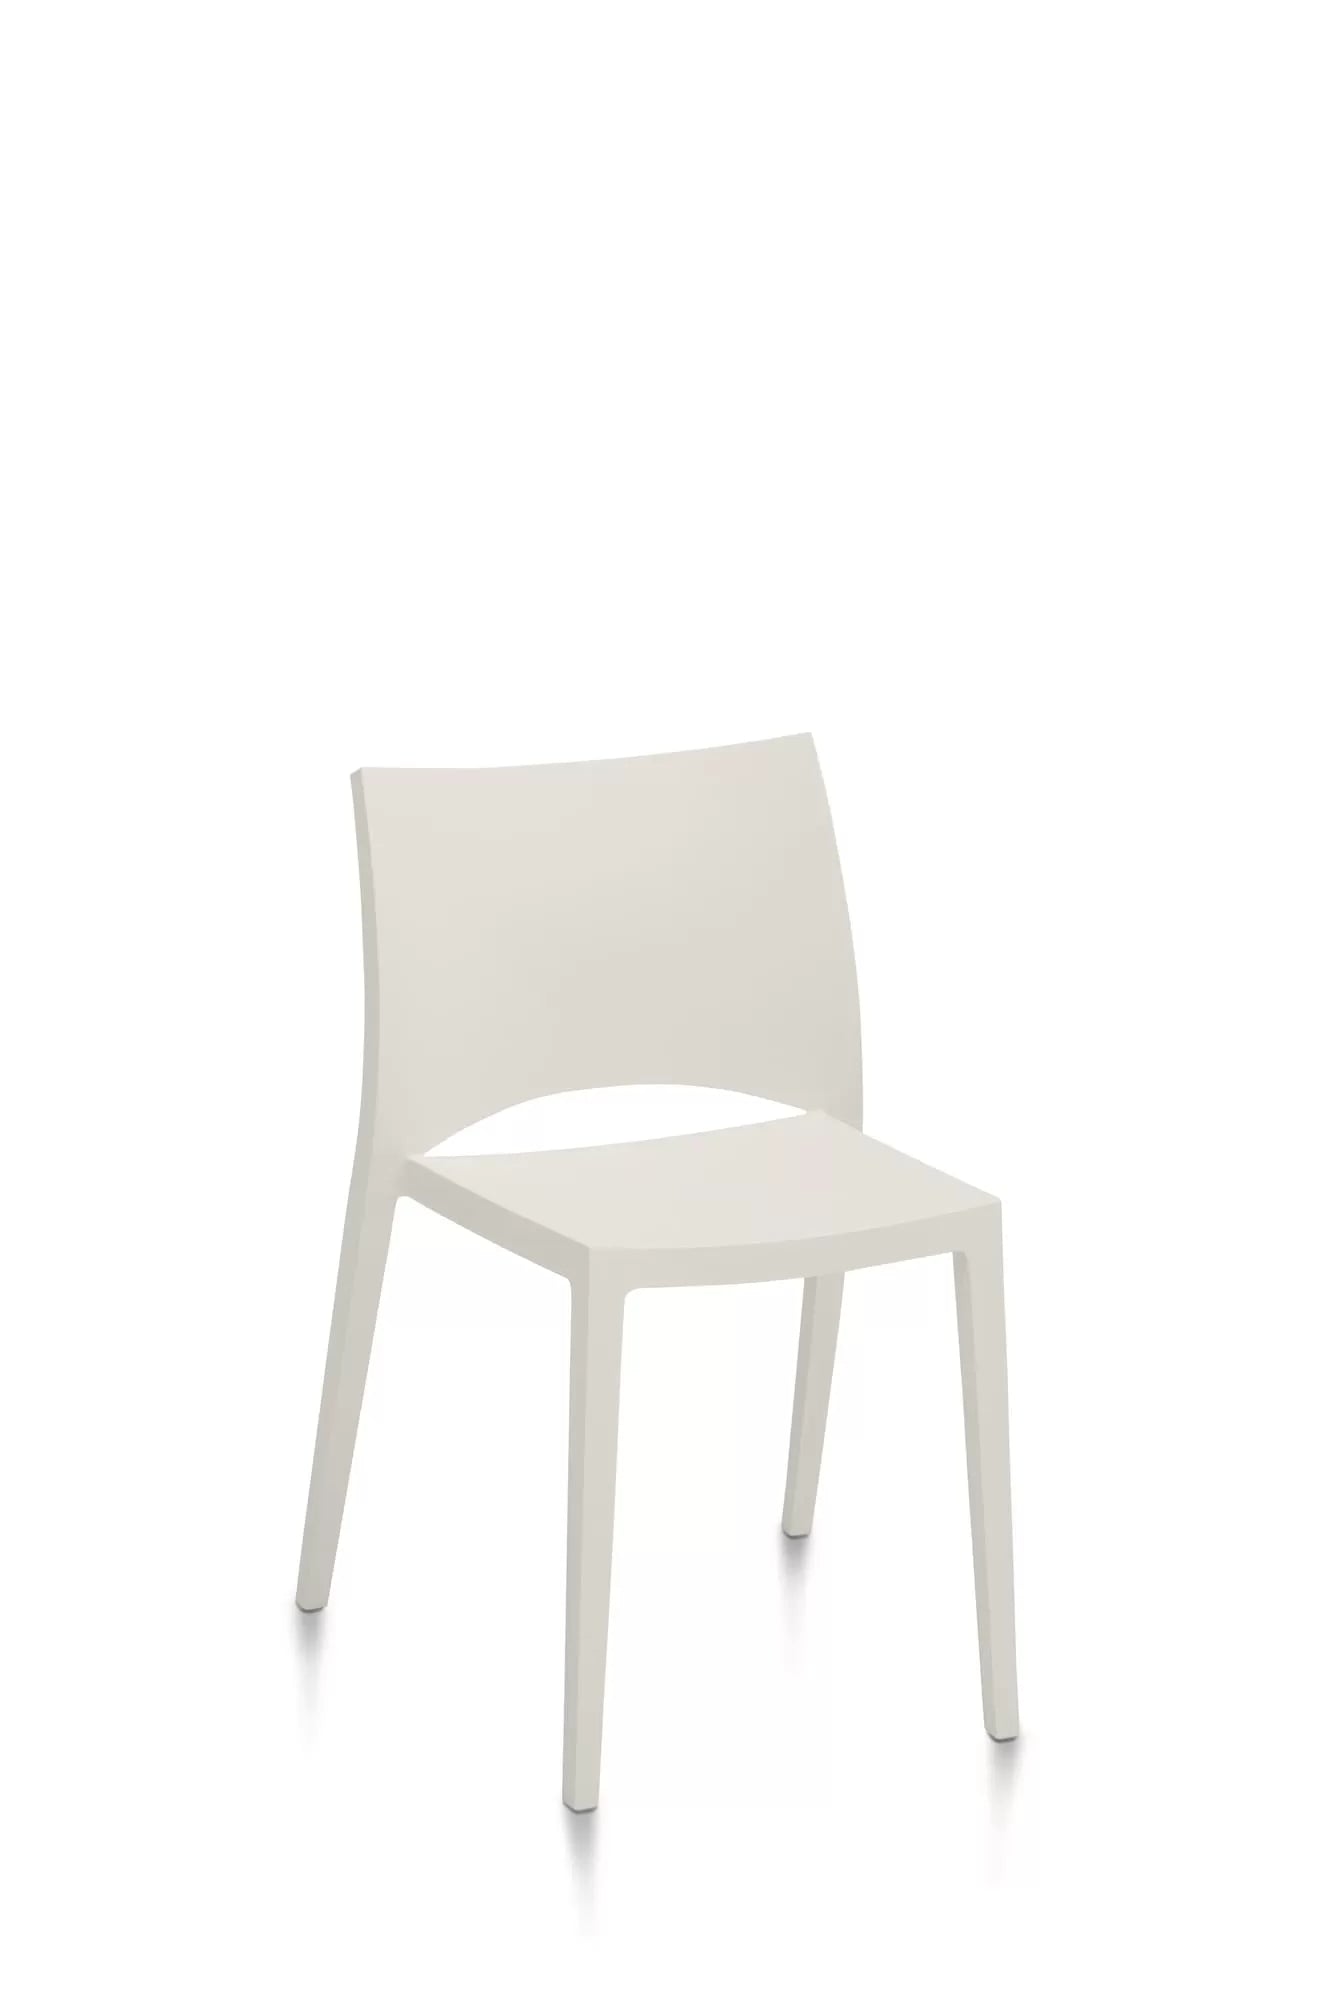 Aqua Stackable And Outdoor Chair In Polypropylene